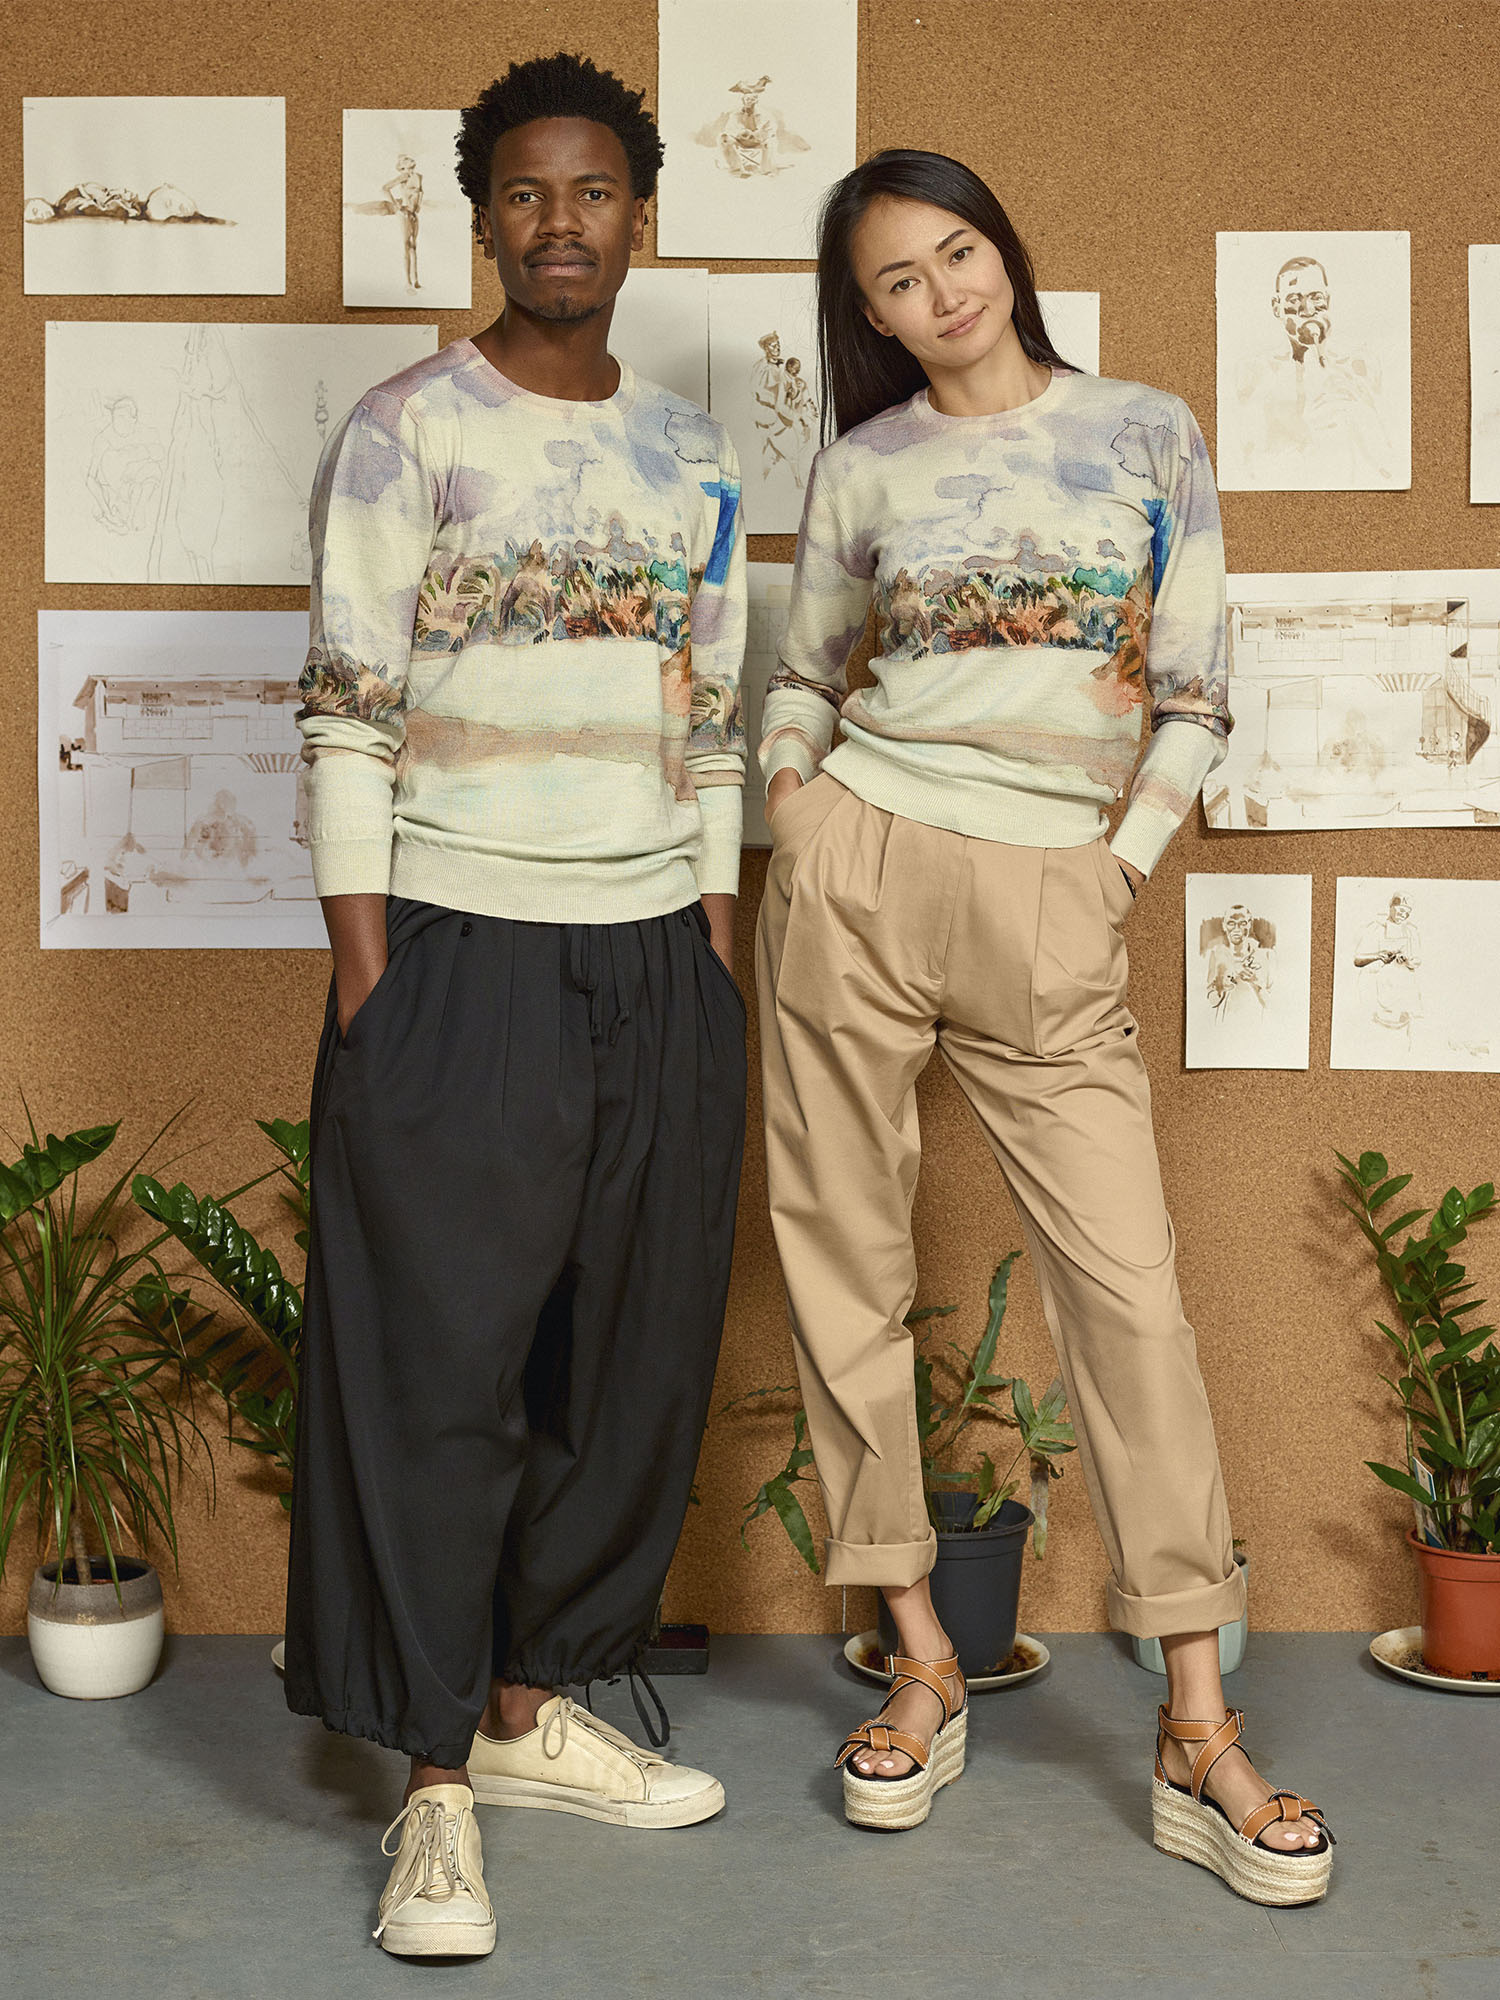 The visionary collaboration creating unique sweaters to promote diversity in art